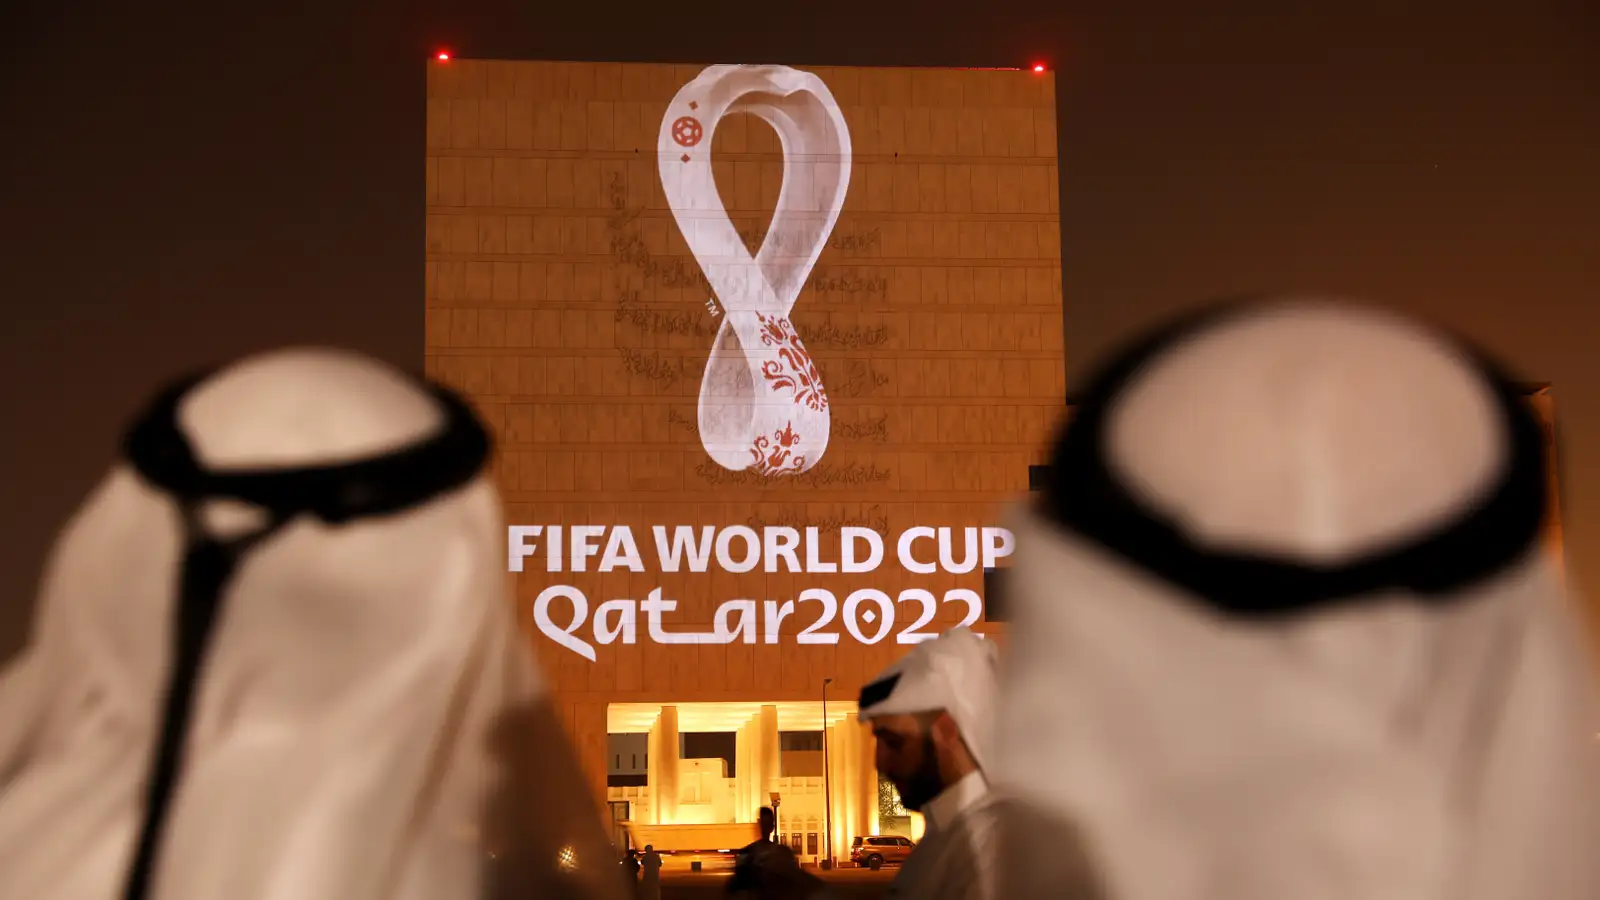 Fears about MERS at the World Cup are overblown